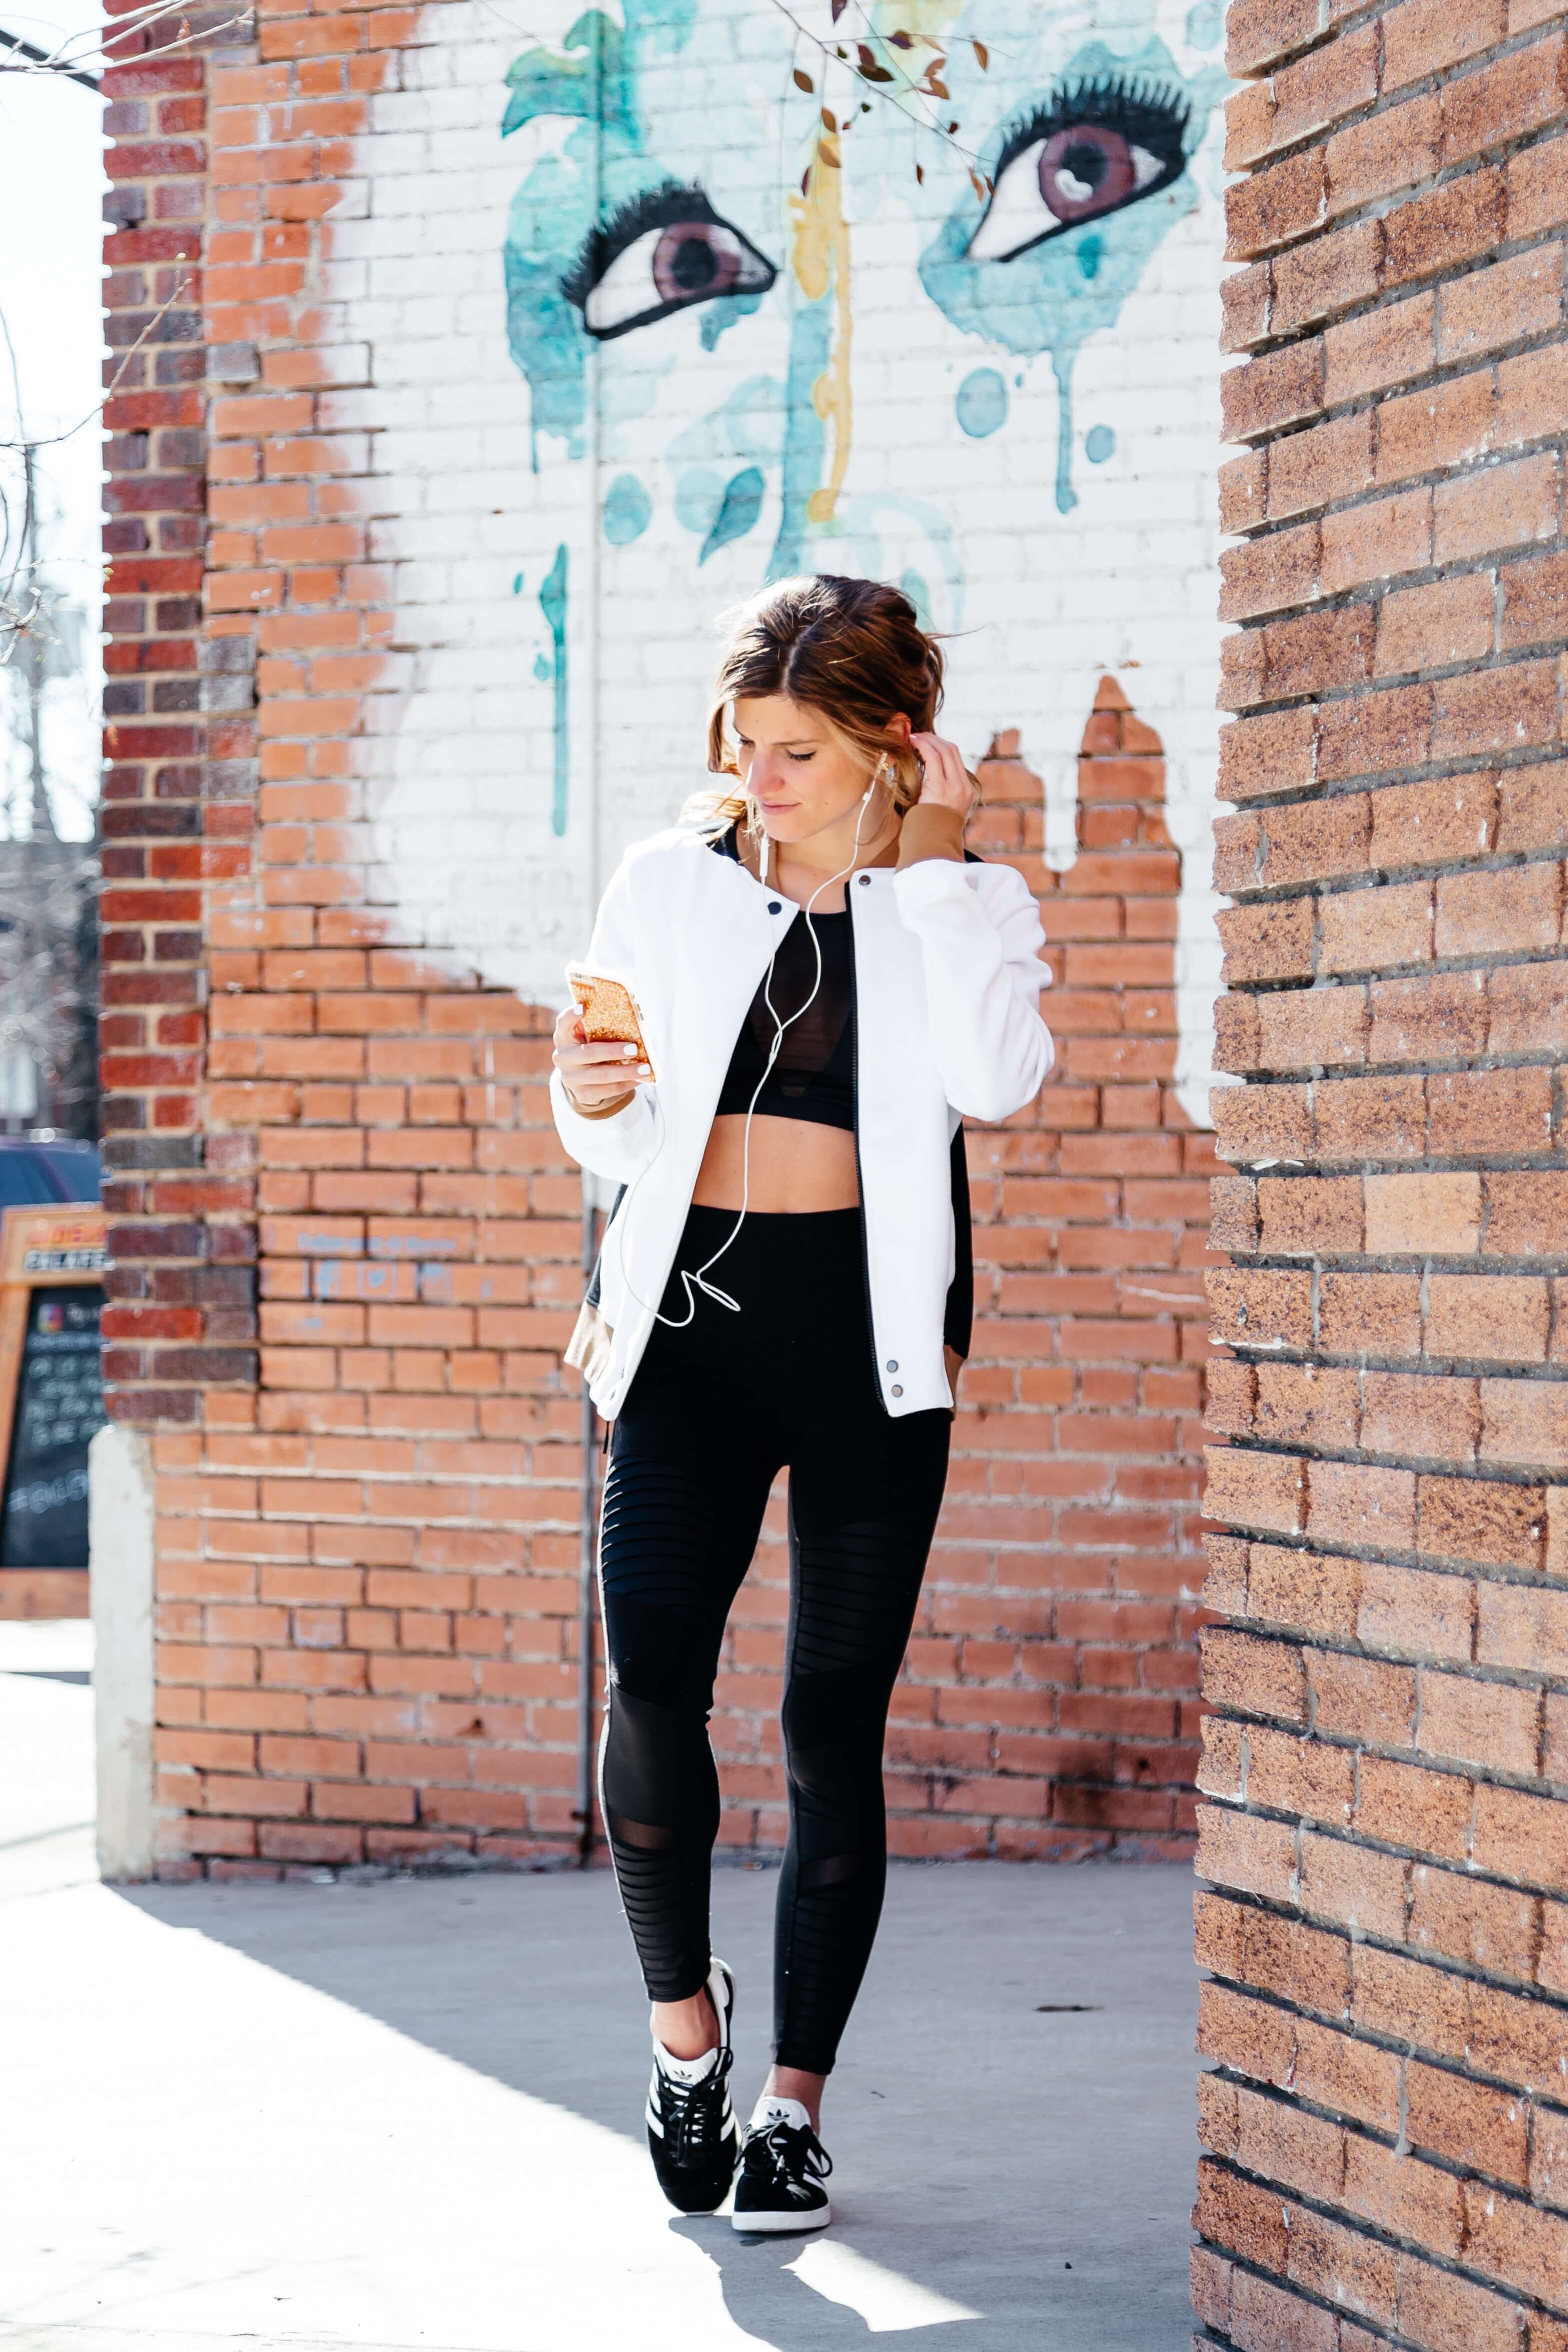 brighton keller in sporty chic athleisure outfit